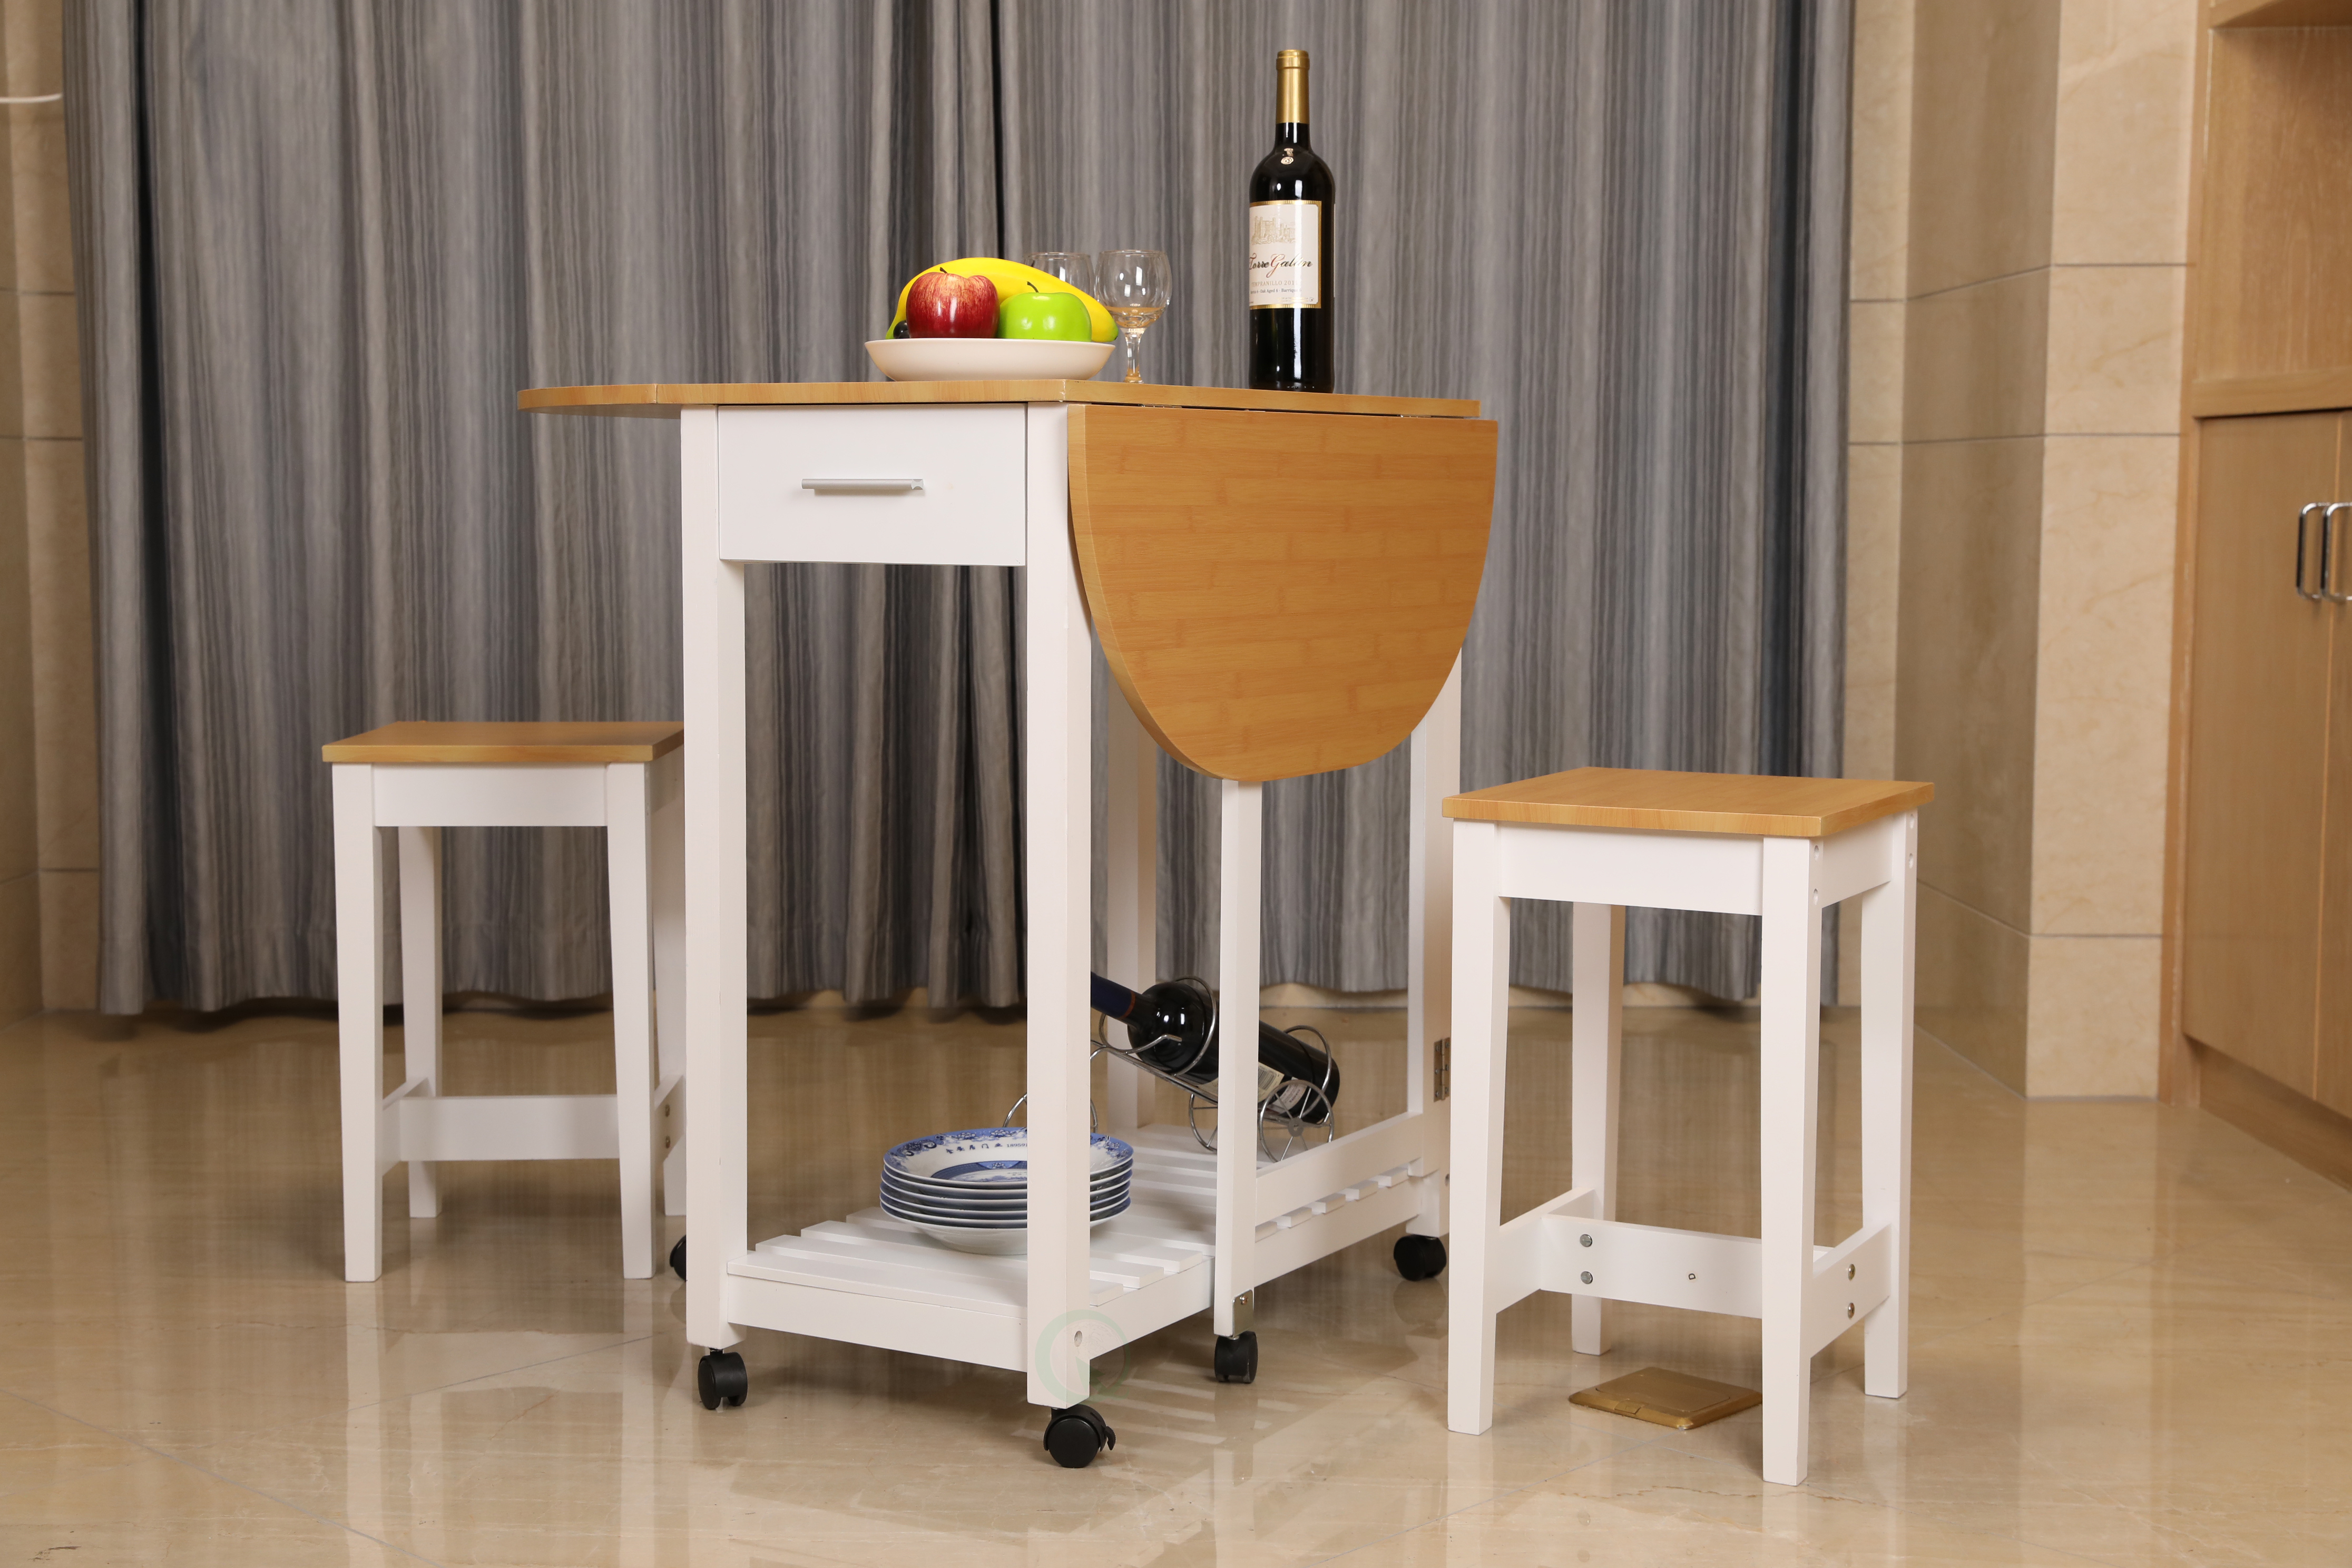 New 3 Piece Kitchen Island Breakfast Bar Set with casters 